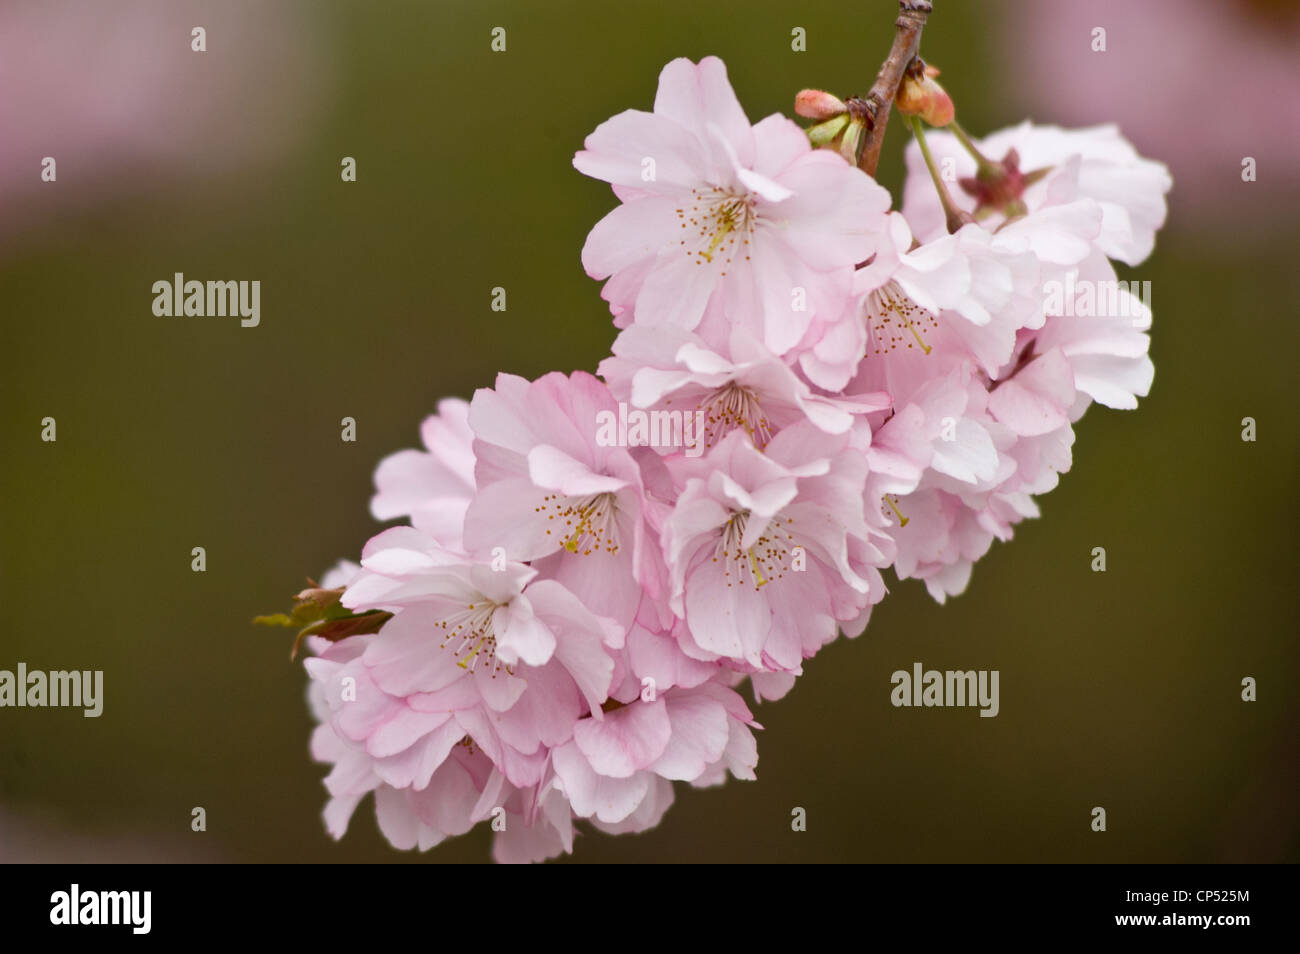 White pink close up of apple flower buds. Stock Photo